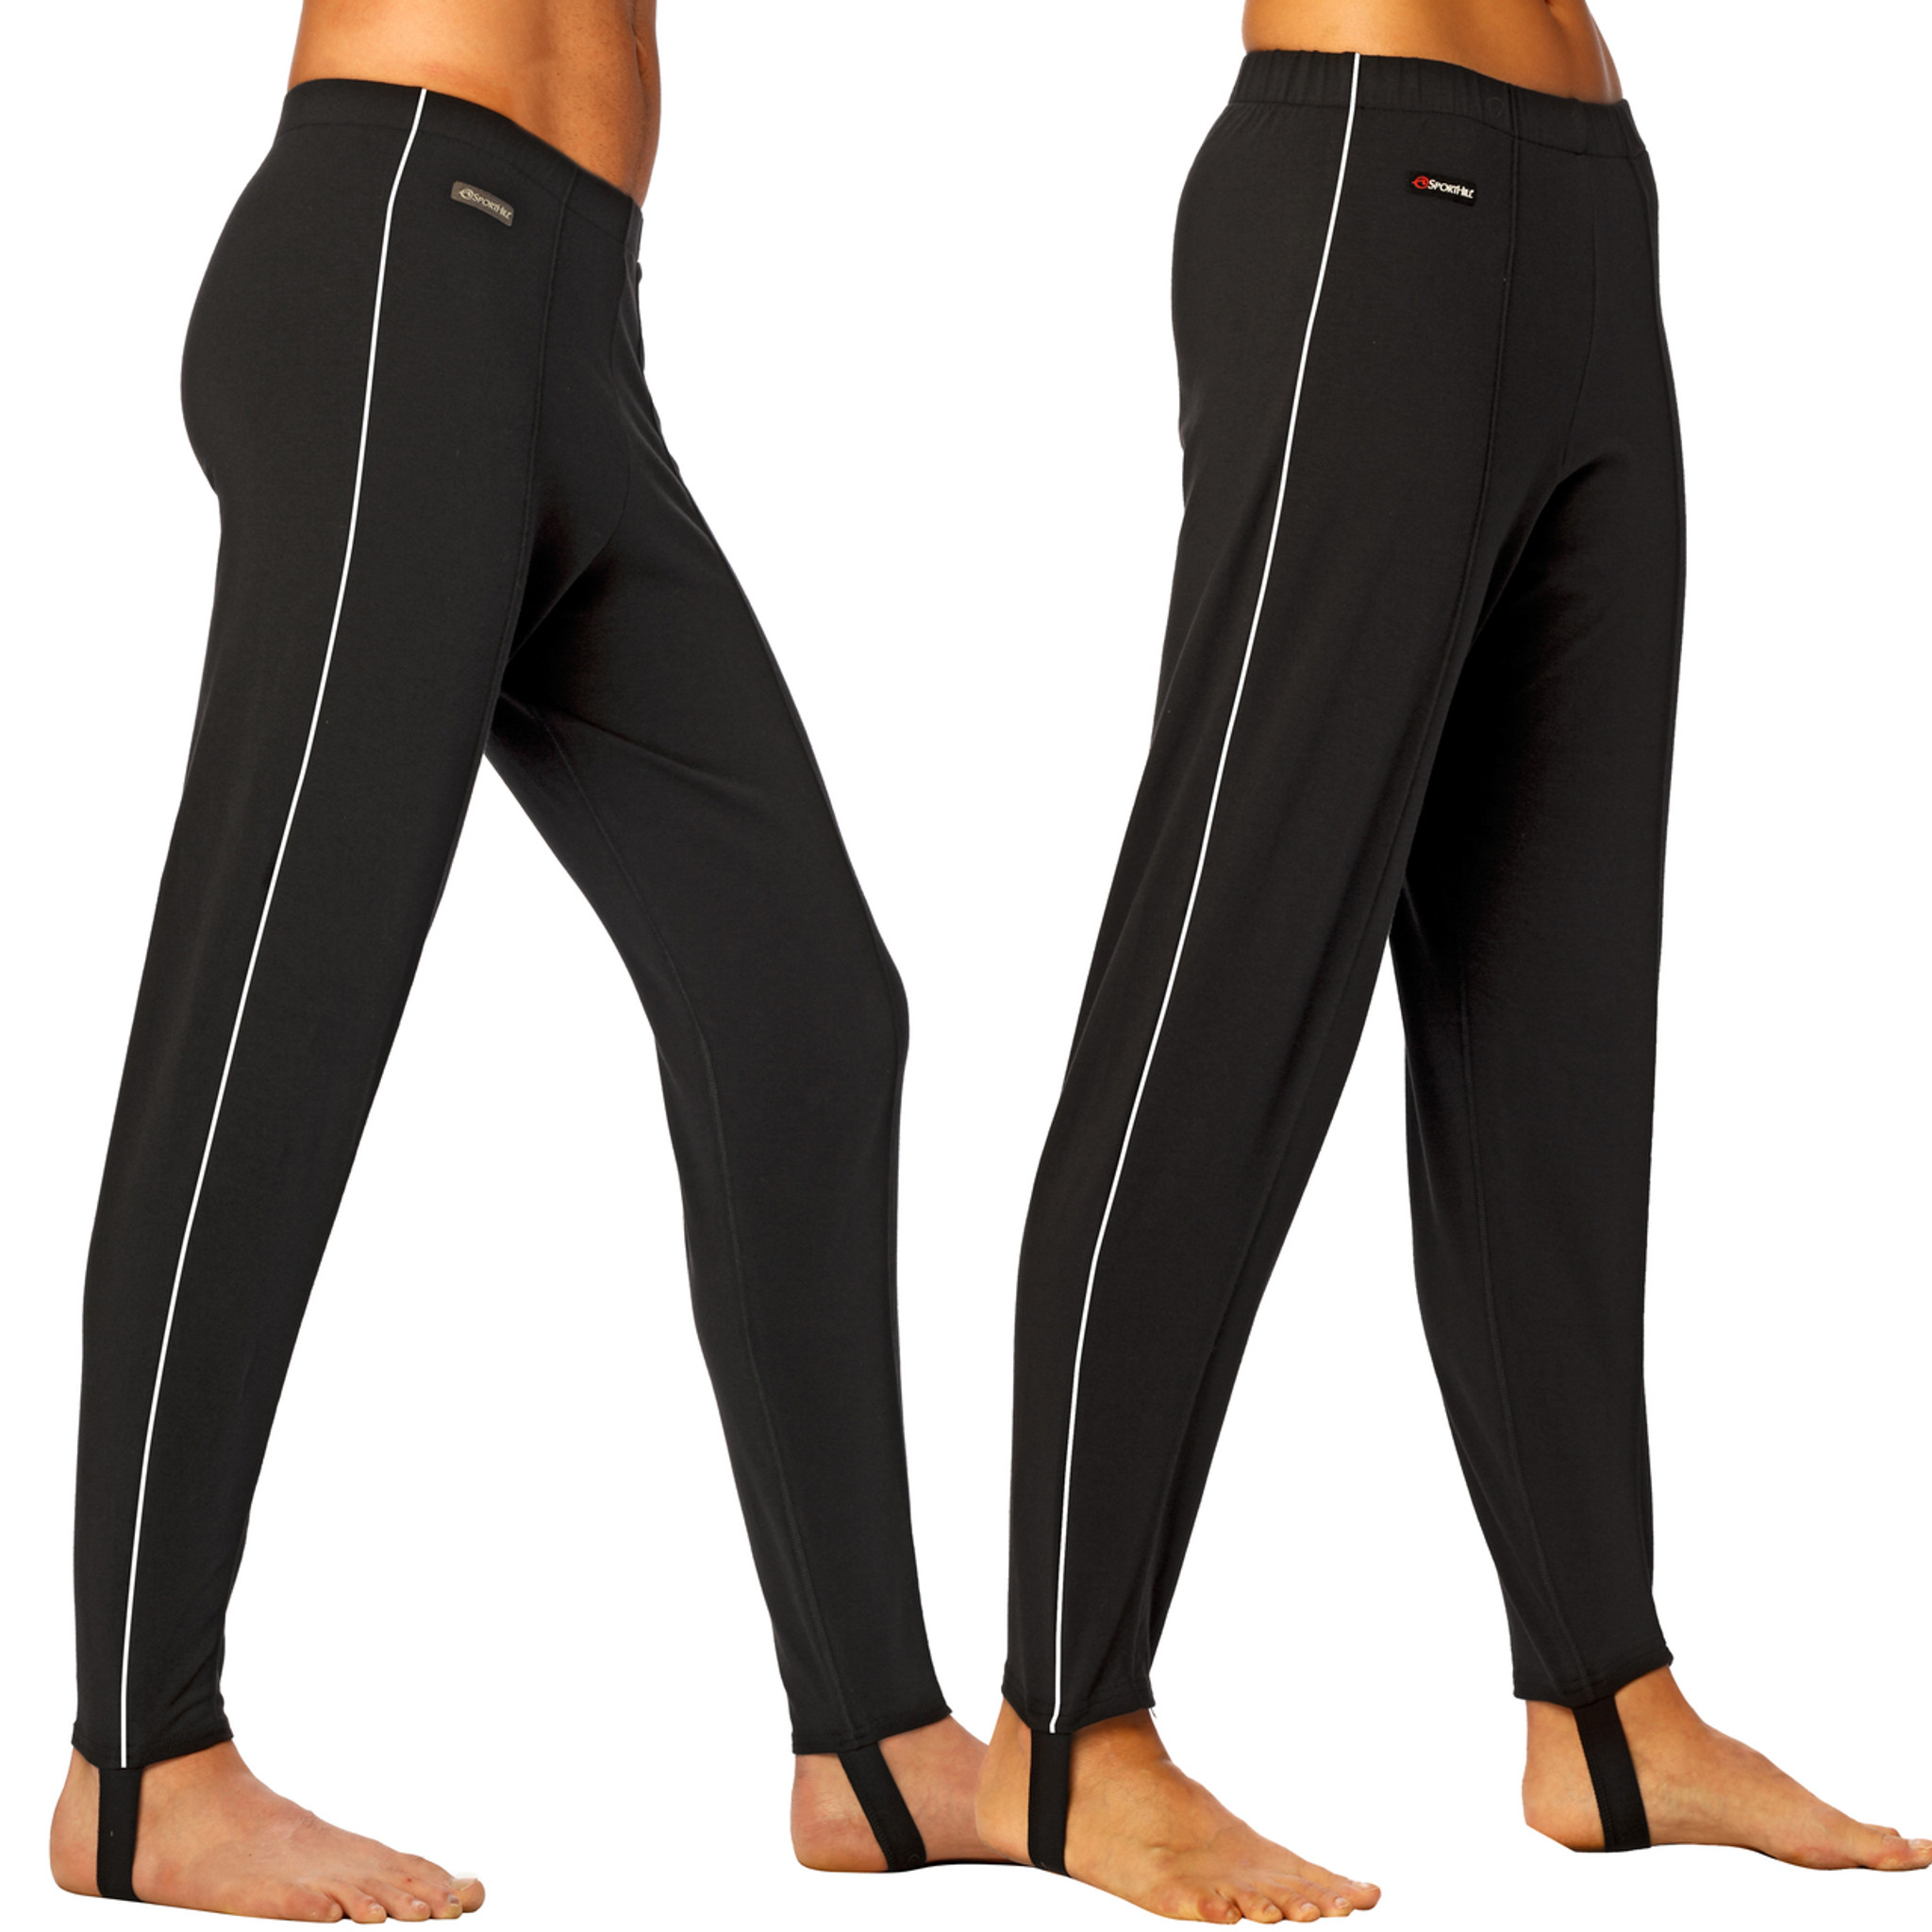 Share 148+ 80s leggings with stirrups super hot